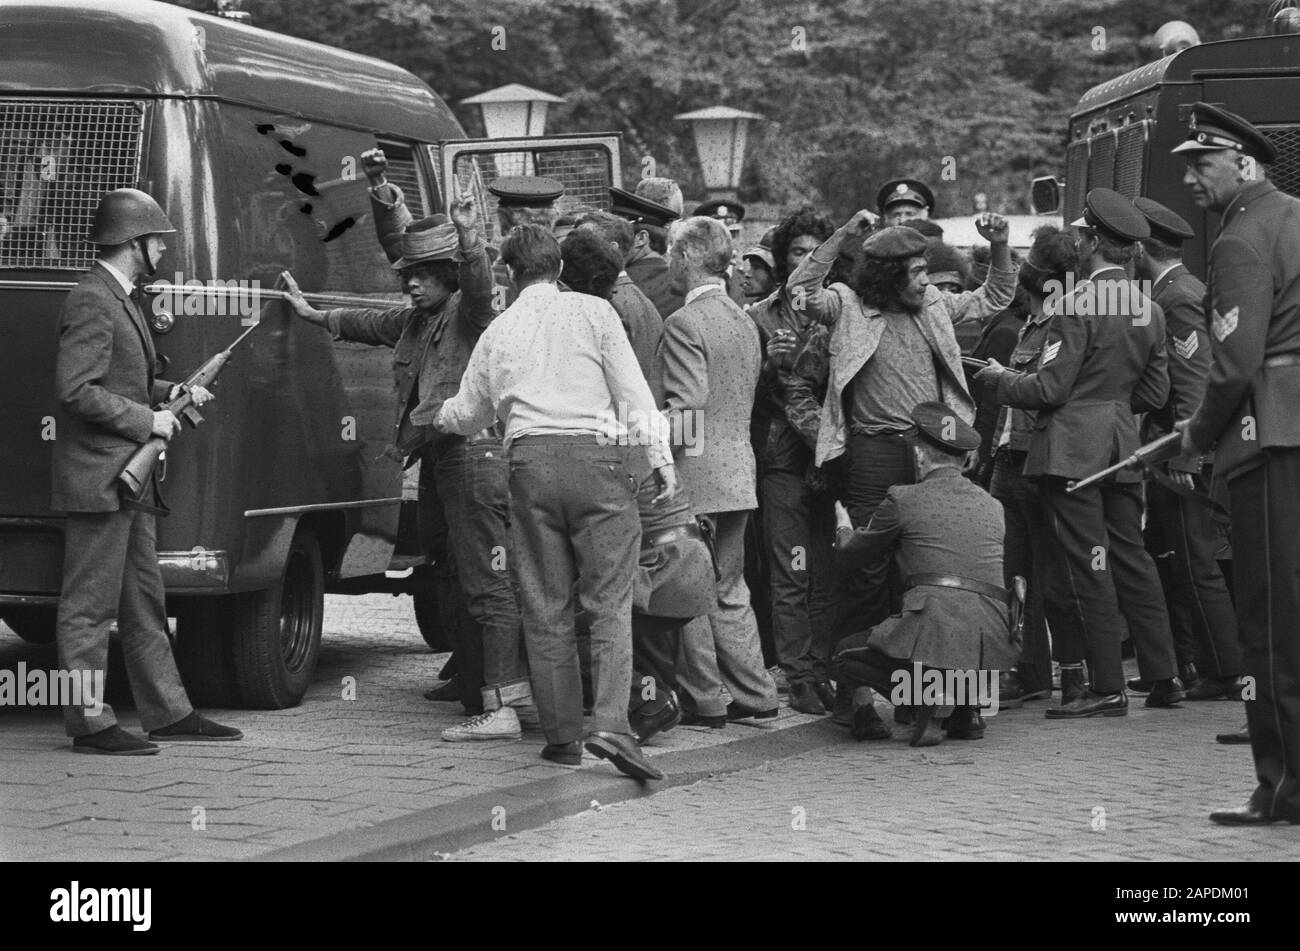 Ambonese occupying home Indonesian Ambassador, Wassenaar; Ambonese are searched before entering police cars Date: 31 August 1970 Location: Wassenaar, Zuid-Holland Keywords: Ambonese, police cars Stock Photo